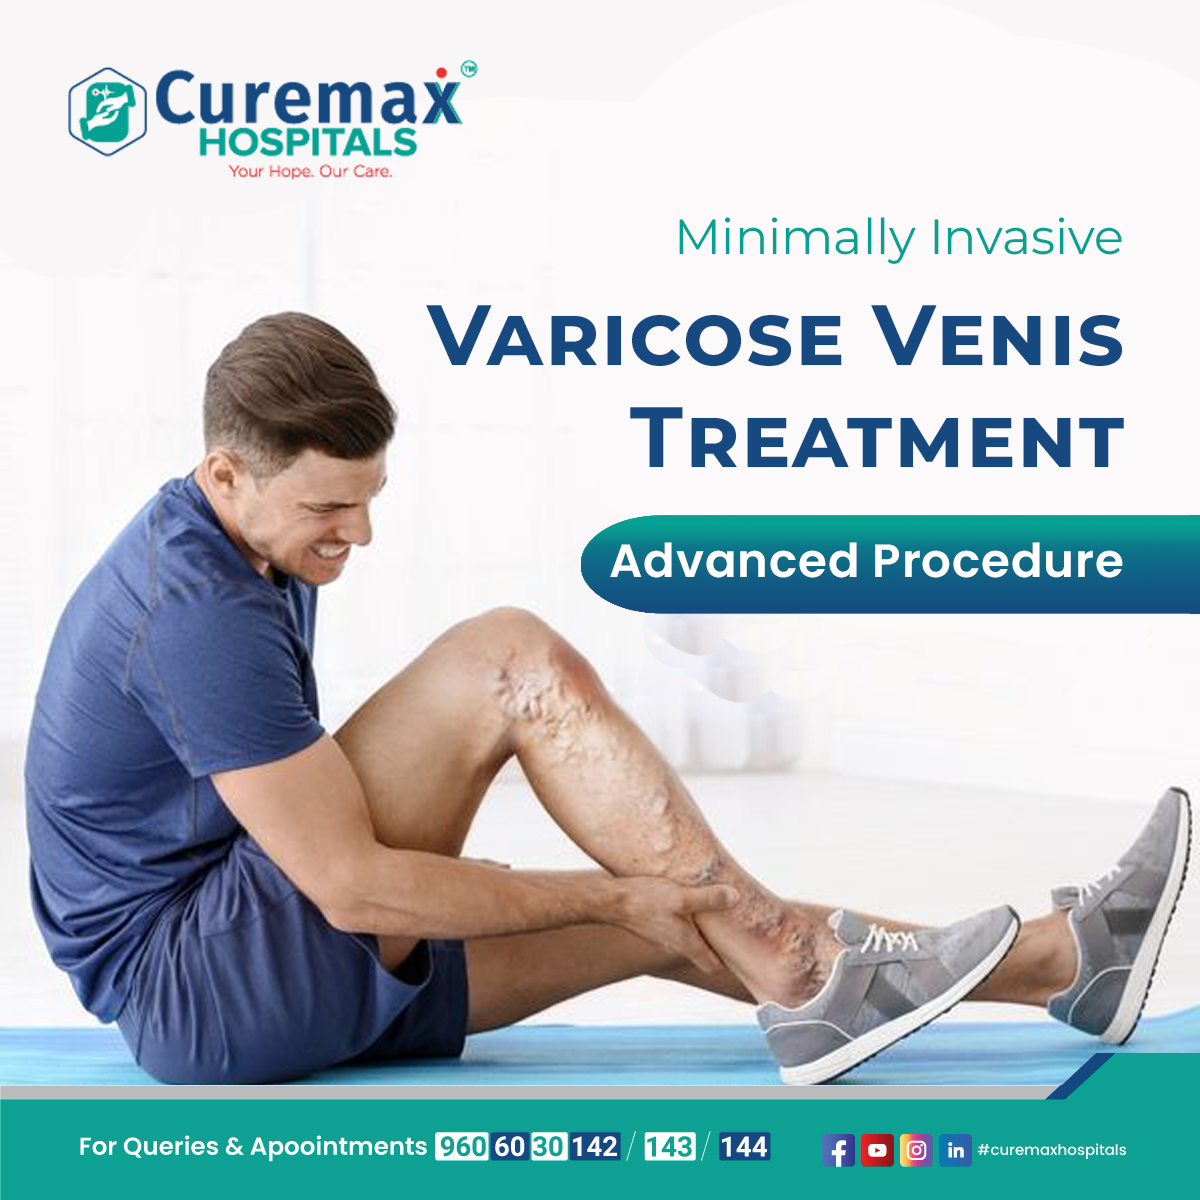 Varicose veins are a common condition that occurs when veins become swollen and twisted, typically in the legs. The condition is caused by weakened or damaged valves in the veins, which can lead to blood pooling and causing the veins to bulge and become visible under the skin. Here are some key facts about varicose veins: Symptoms: Varicose veins can cause a range of symptoms, including pain, achiness, heaviness, swelling, and aching in the legs. Some people may also experience skin changes, such as discoloration or sores. Risk factors: There are several factors that can increase the risk of developing varicose veins, including age, family history, pregnancy, obesity, and prolonged standing or sitting. Diagnosis: A healthcare professional can usually diagnose varicose veins by examining the affected area and asking about symptoms. In some cases, additional tests may be needed to determine the extent of the condition. Treatment: Treatment for varicose veins typically involves lifestyle changes, such as exercise and weight management, and wearing compression stockings to improve circulation. In more severe cases, medical procedures such as sclerotherapy, laser therapy, or surgical removal may be necessary. Prevention: There are several steps you can take to help prevent varicose veins, including exercising regularly, maintaining a healthy weight, avoiding prolonged periods of standing or sitting, and wearing compression stockings. While varicose veins are generally not a serious health concern, they can cause discomfort and impact quality of life. If you are experiencing symptoms of varicose veins, it is important to talk to a healthcare professional to determine the best course of treatment.